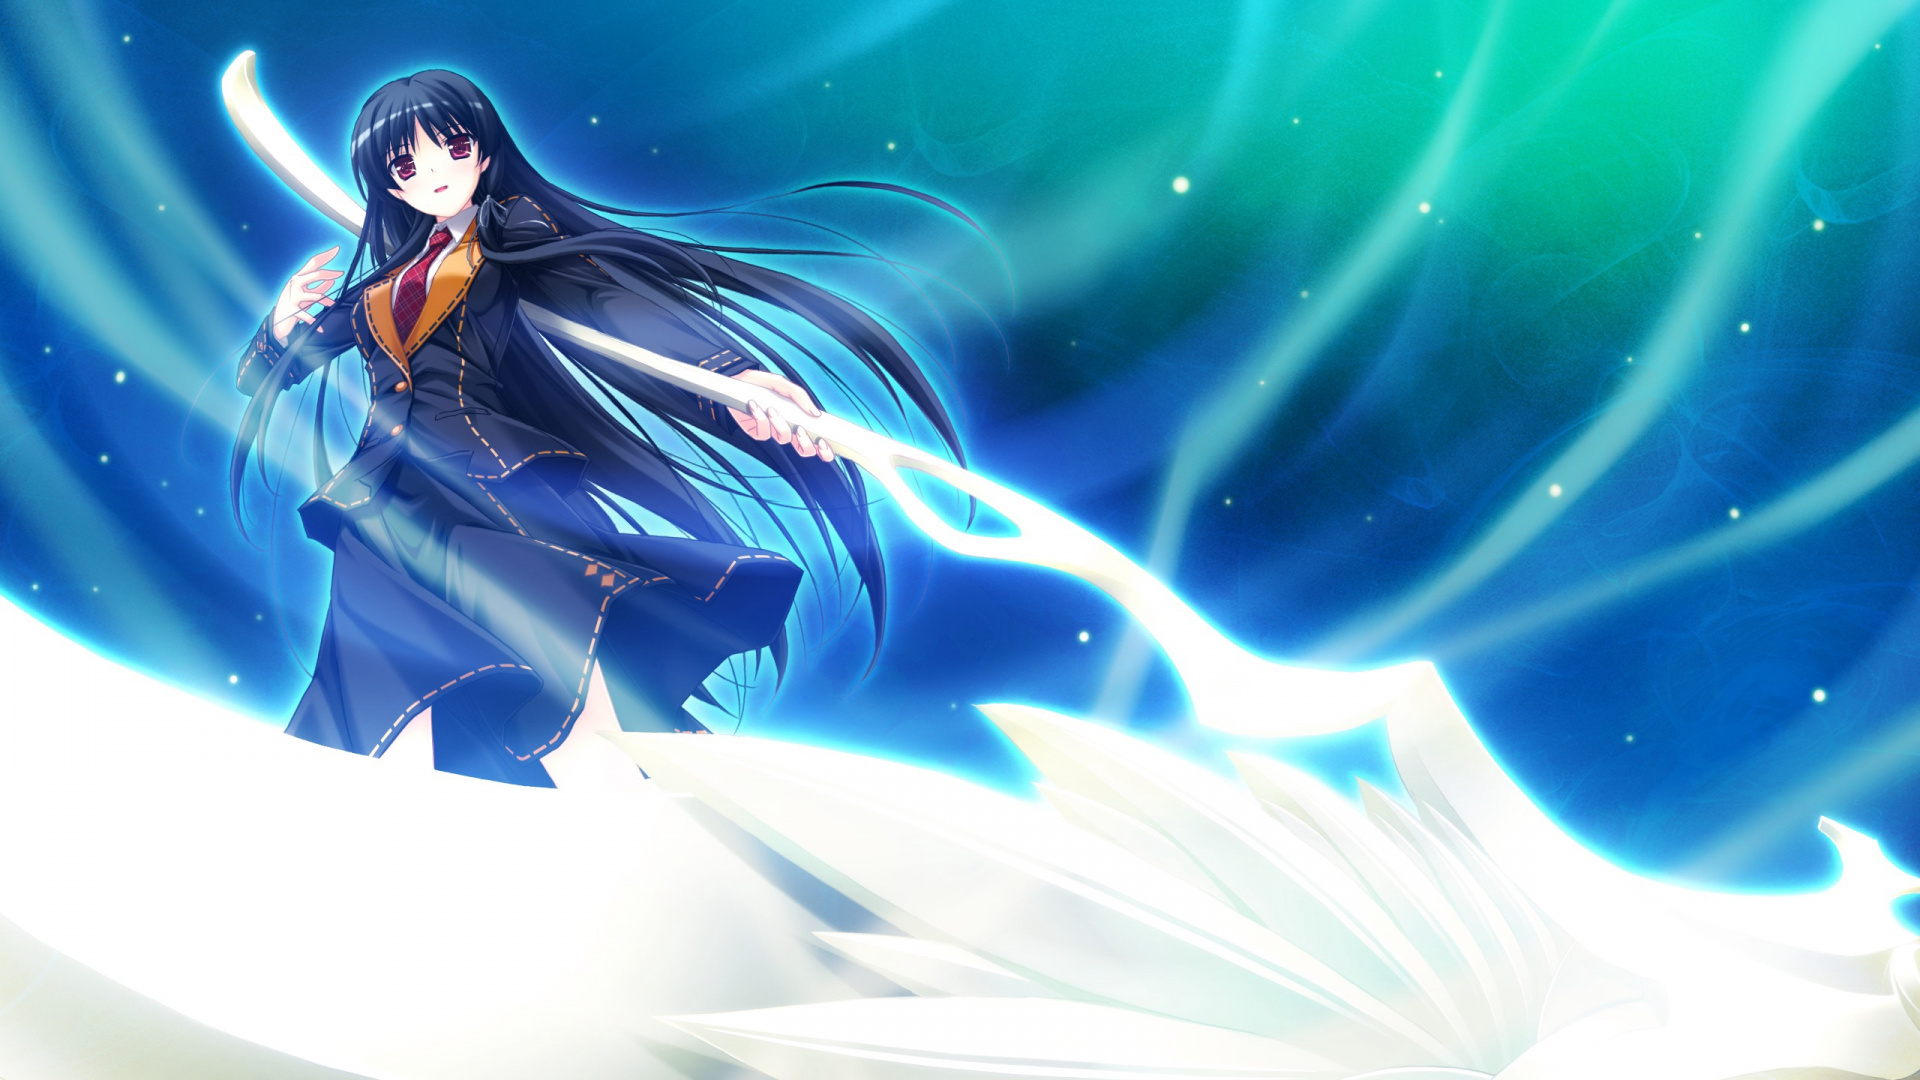 Woman in Blue Dress Anime Character. Wallpaper in 1920x1080 Resolution